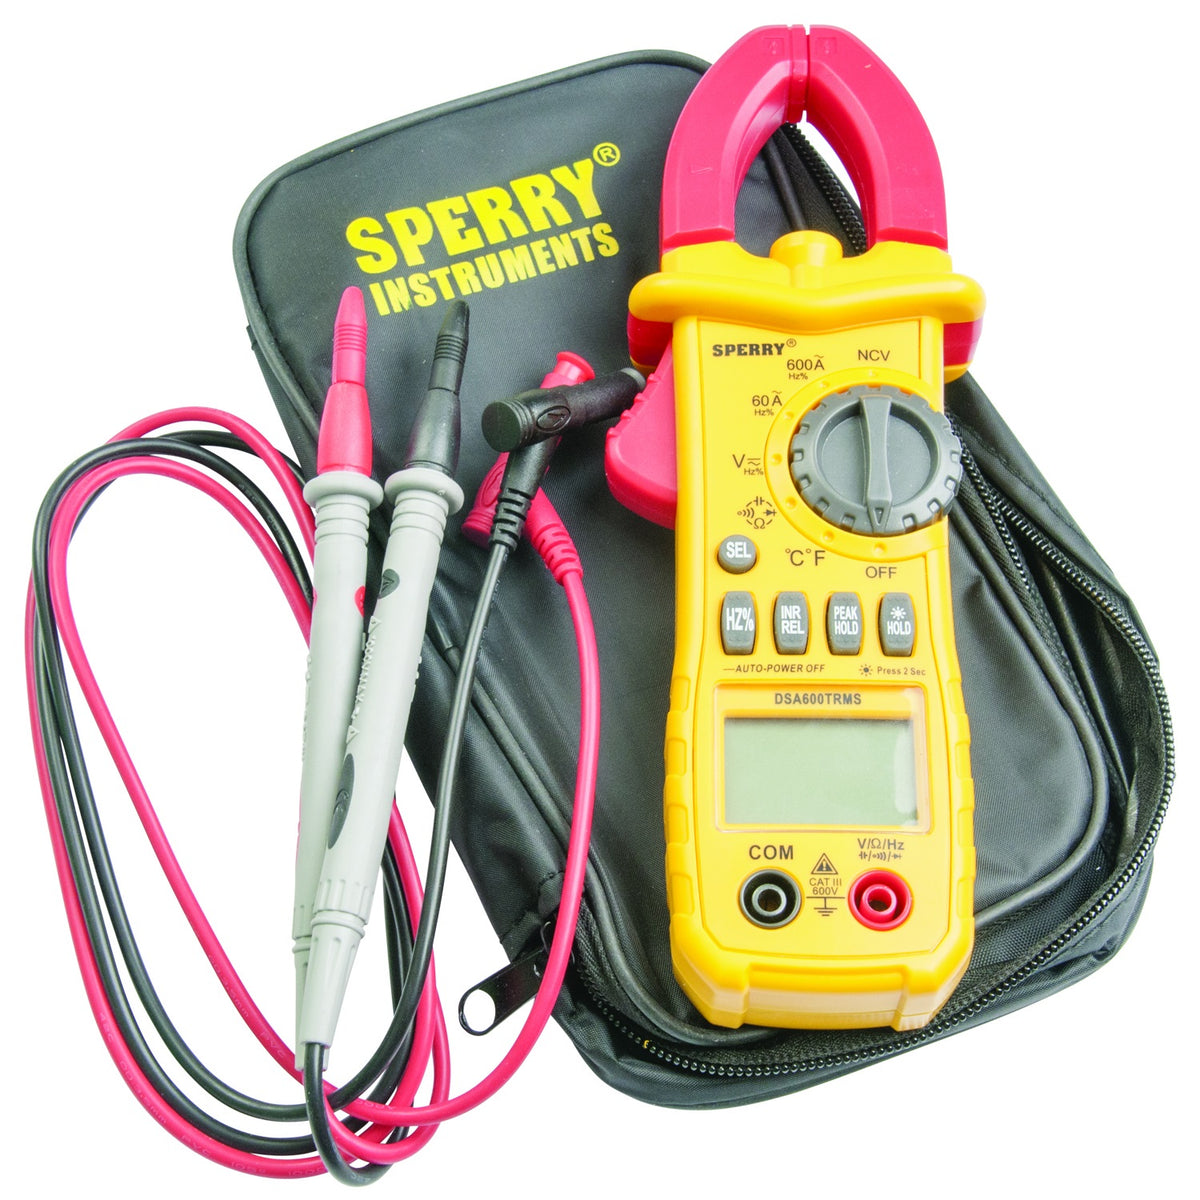 Buy sperry dsa600trms - Online store for electrical supplies, fuse pullers in USA, on sale, low price, discount deals, coupon code